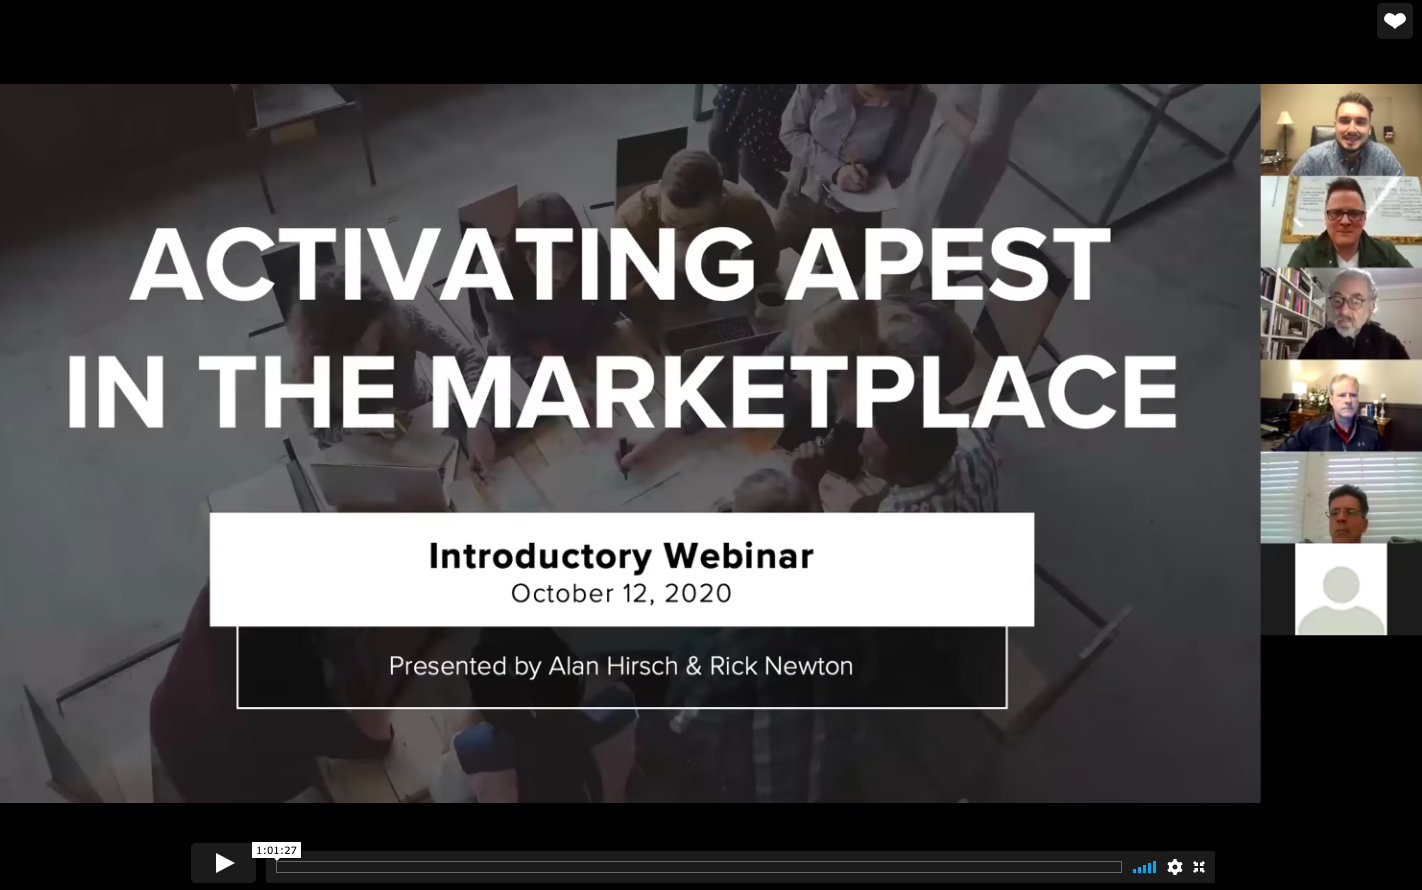 Activating APEST in the Marketplace Webinar